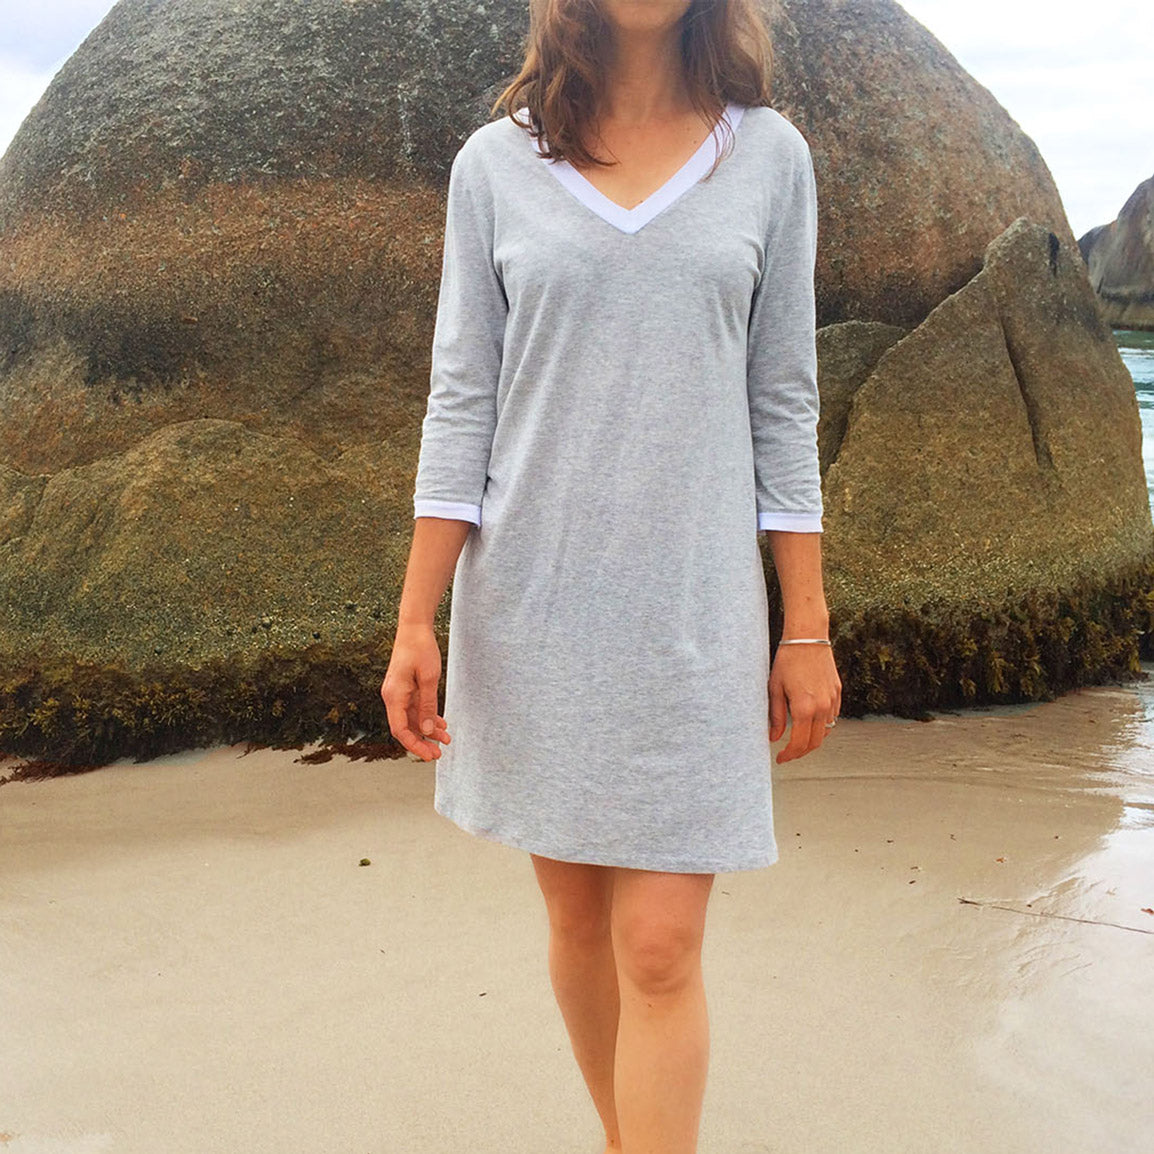 Womens cotton nighties Australia. Organic cotton and lace nightgown made in Australia.